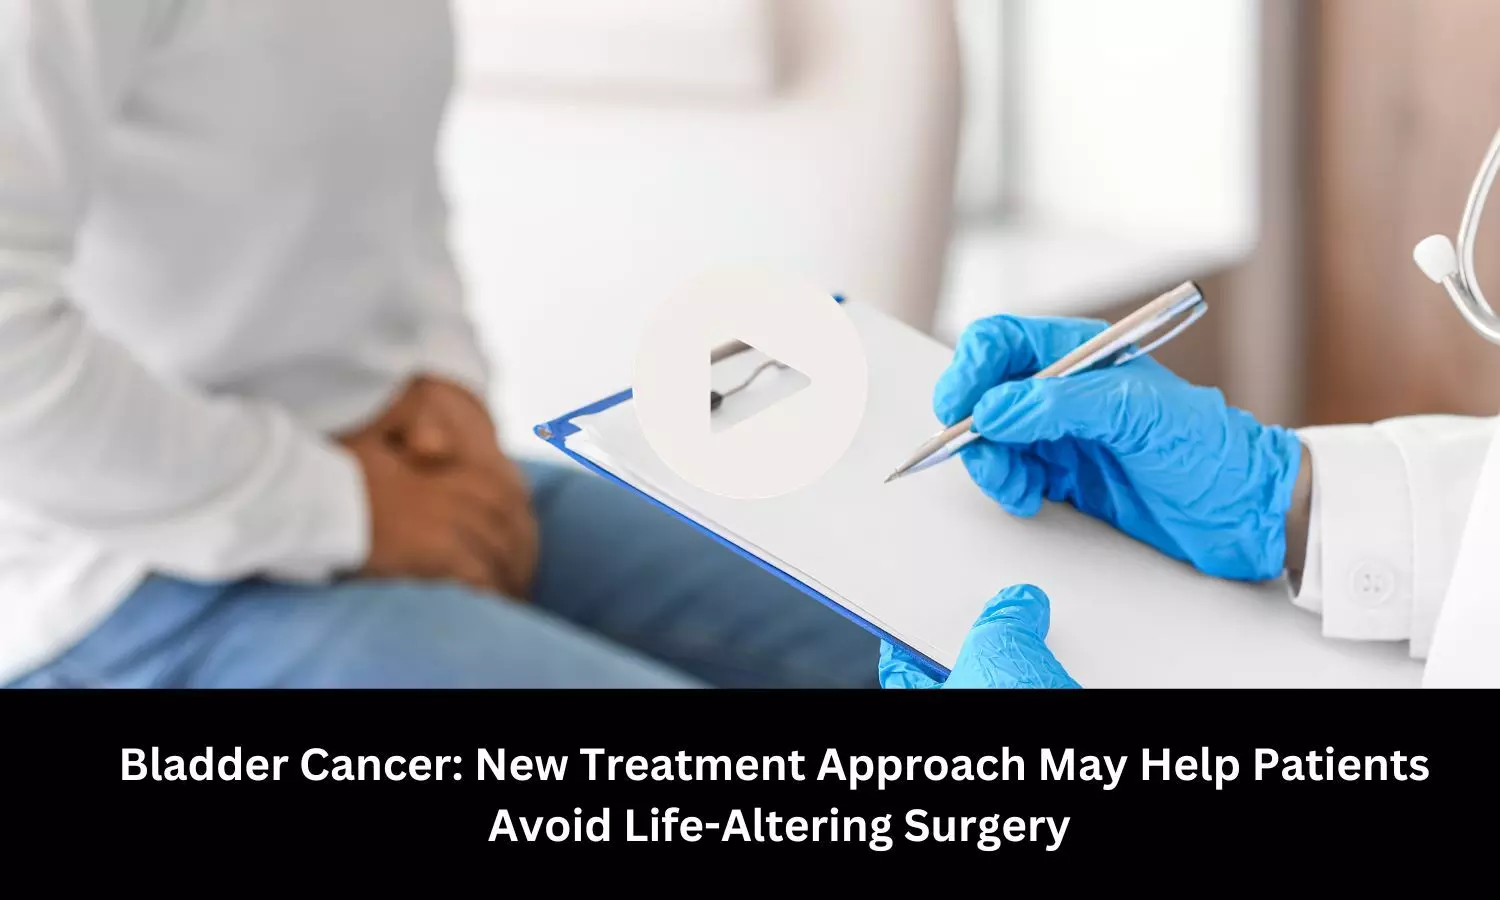 Bladder Cancer: New Treatment Approach May Help Patients Avoid Life-Altering Surgery